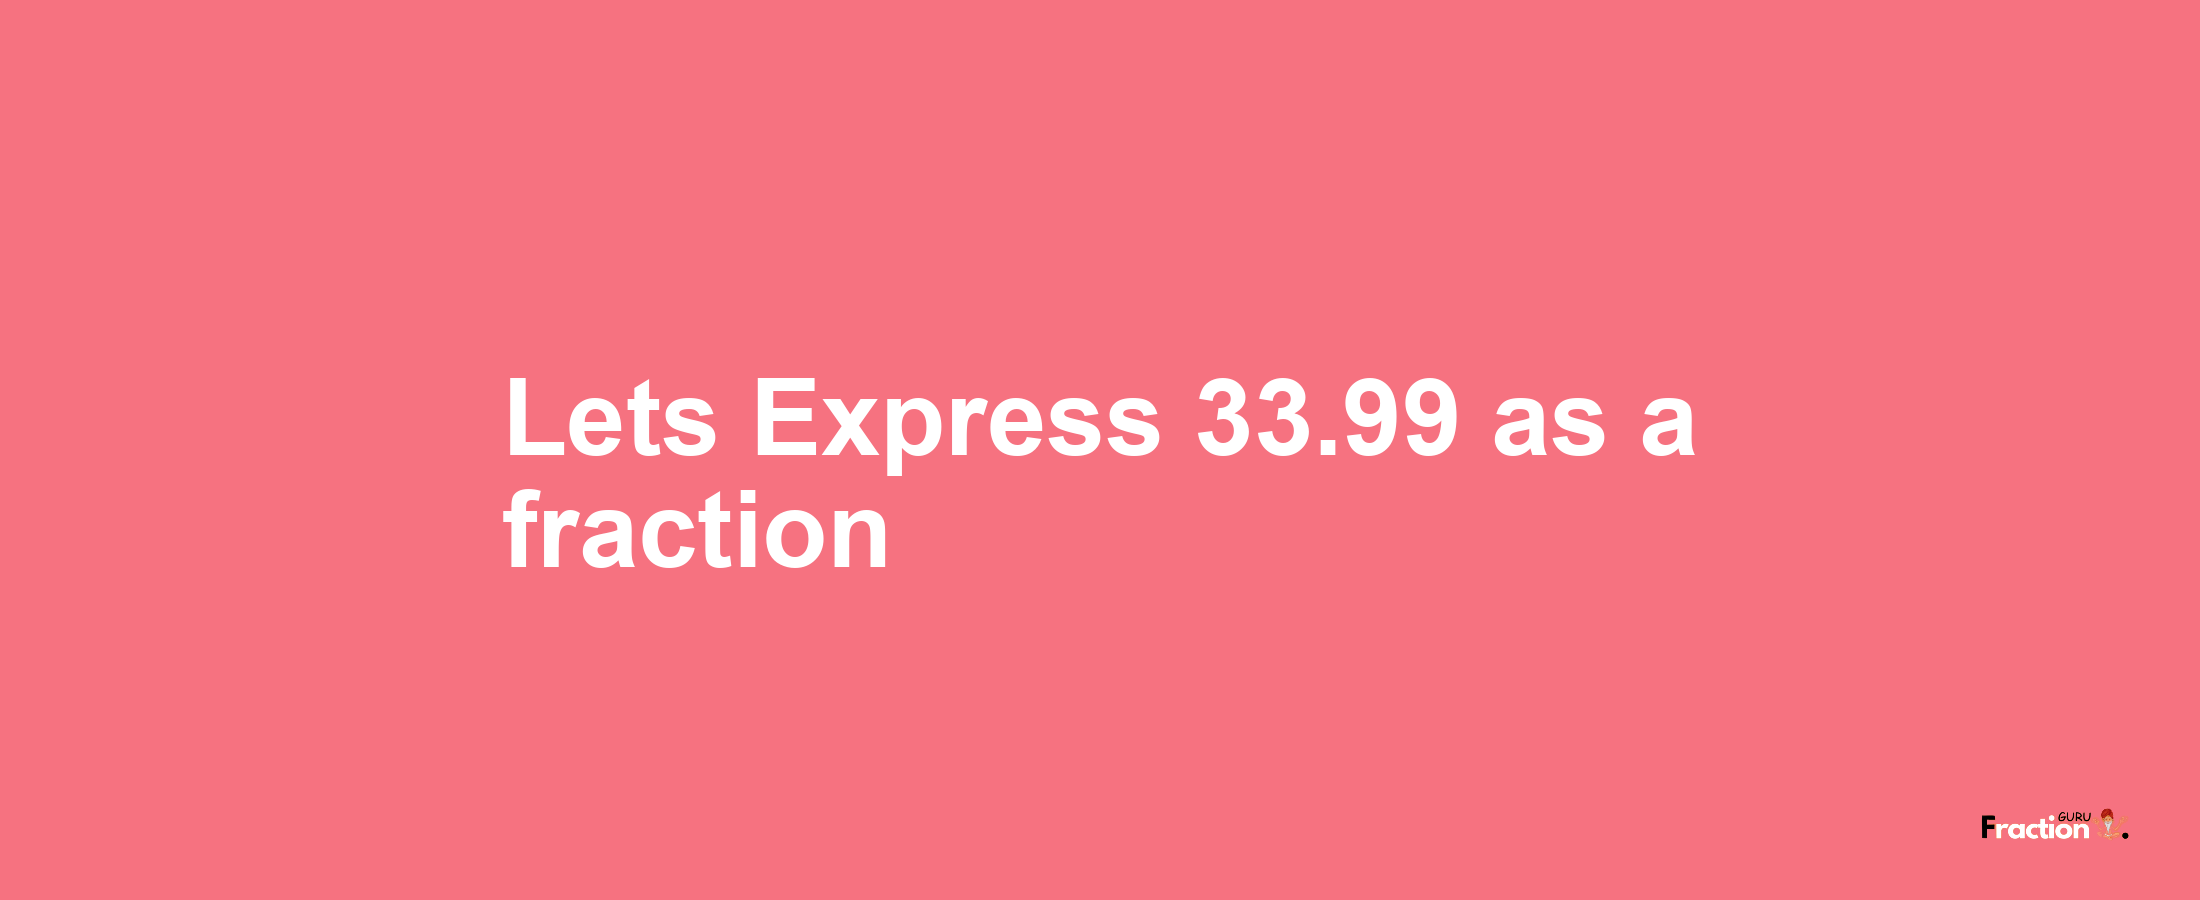 Lets Express 33.99 as afraction